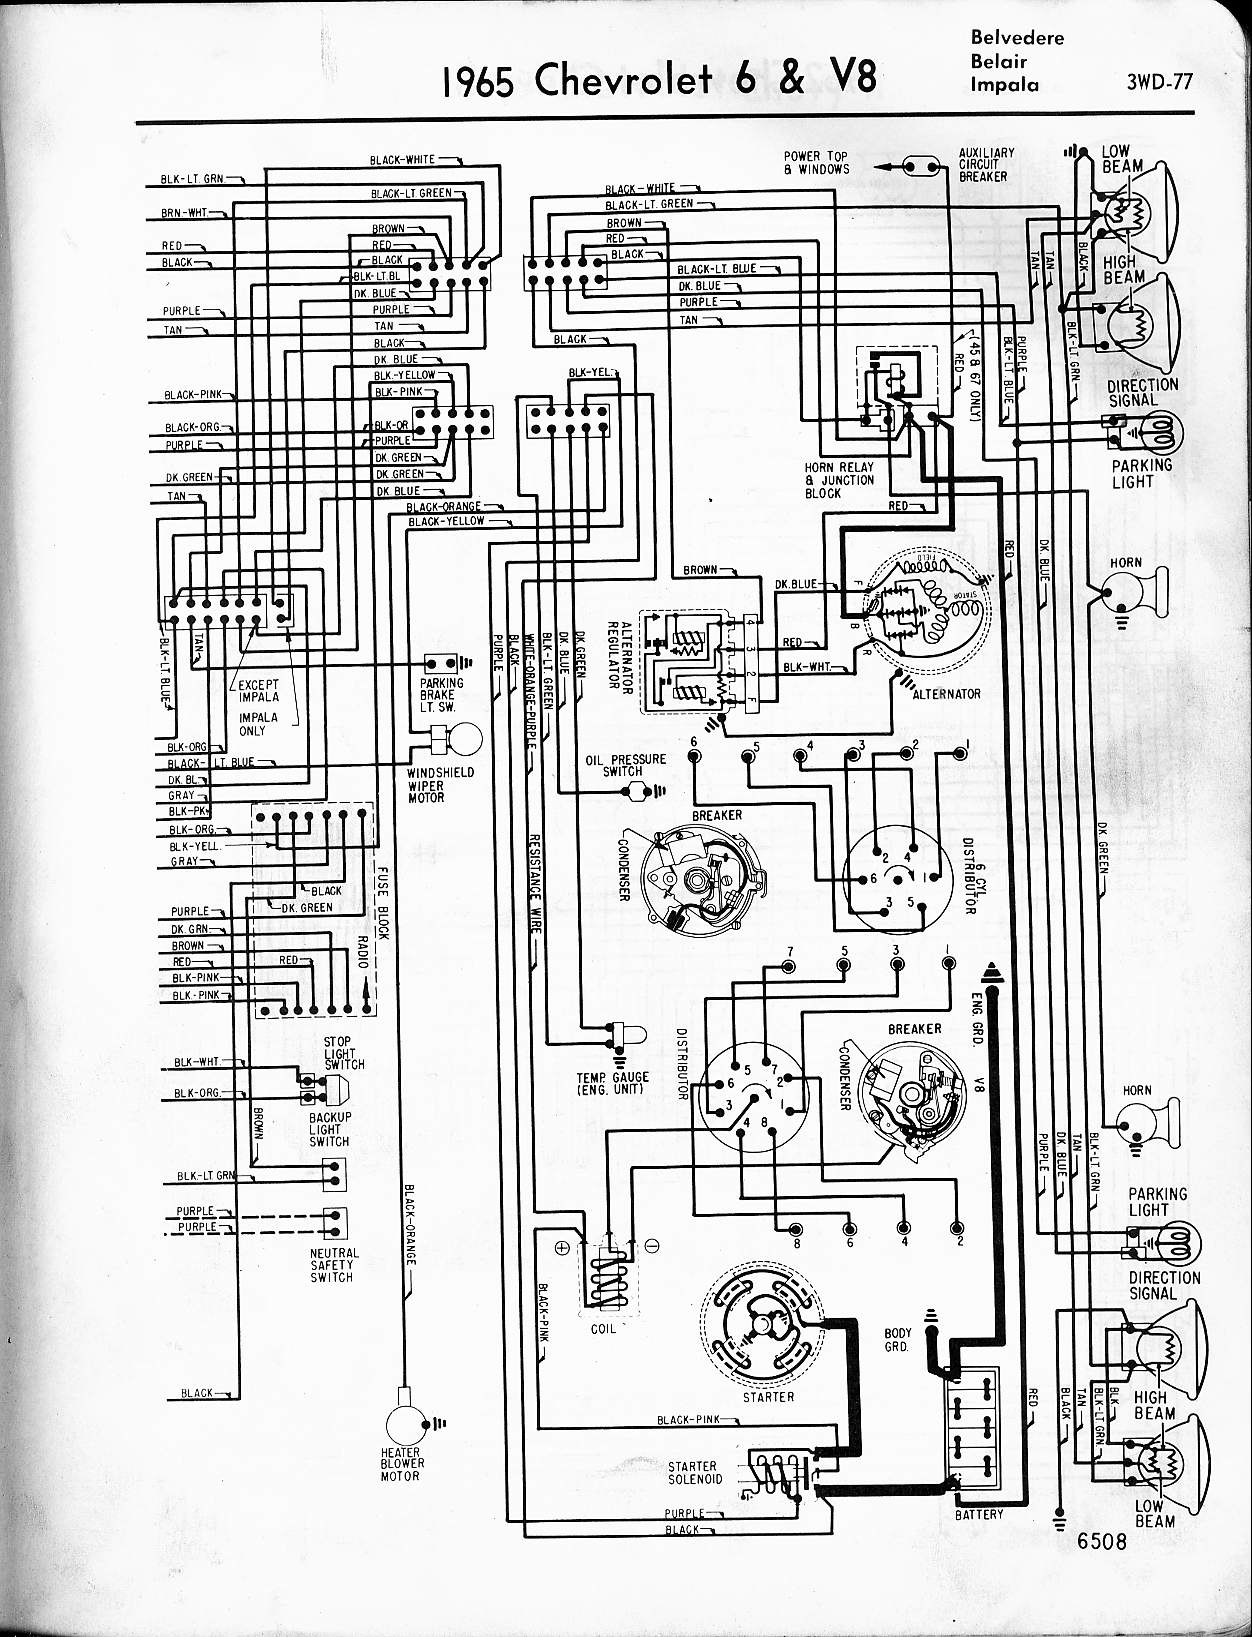 1965 Chevy Truck Turn Signal Wiring Diagram - Electrical Schematic